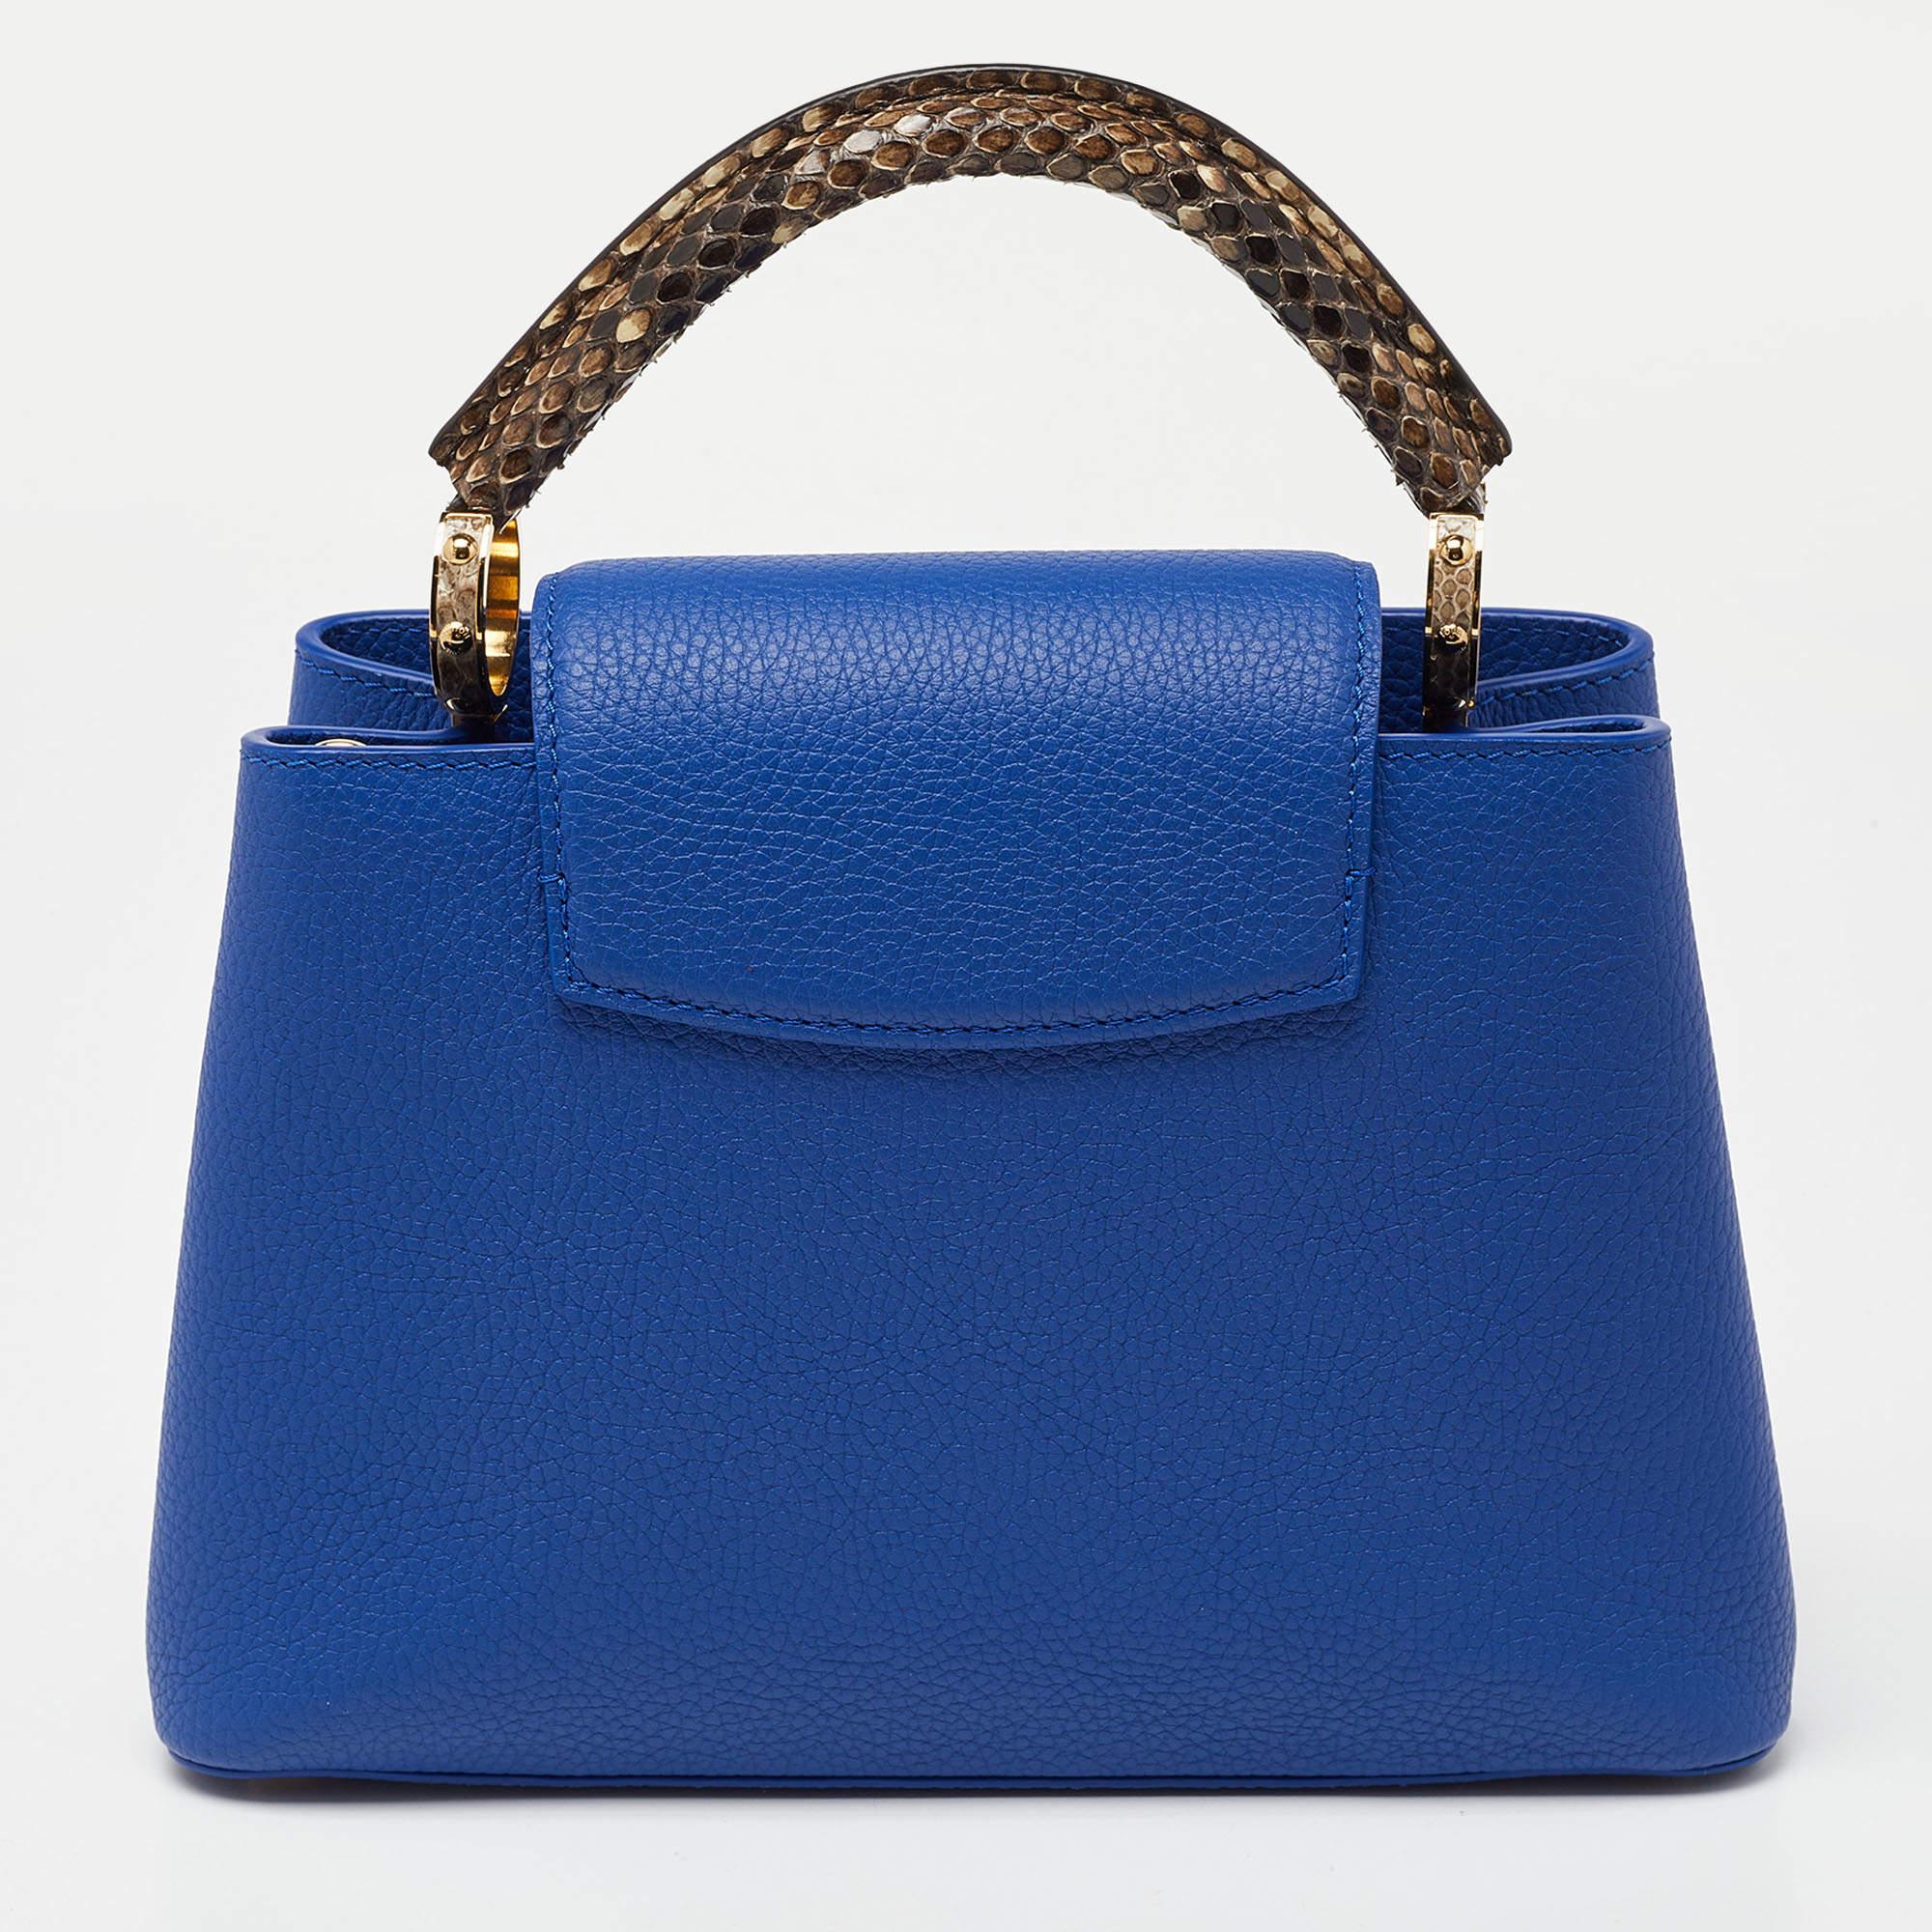 Louis Vuitton Blue Leather and Python Capucines BB Bag For Sale 6